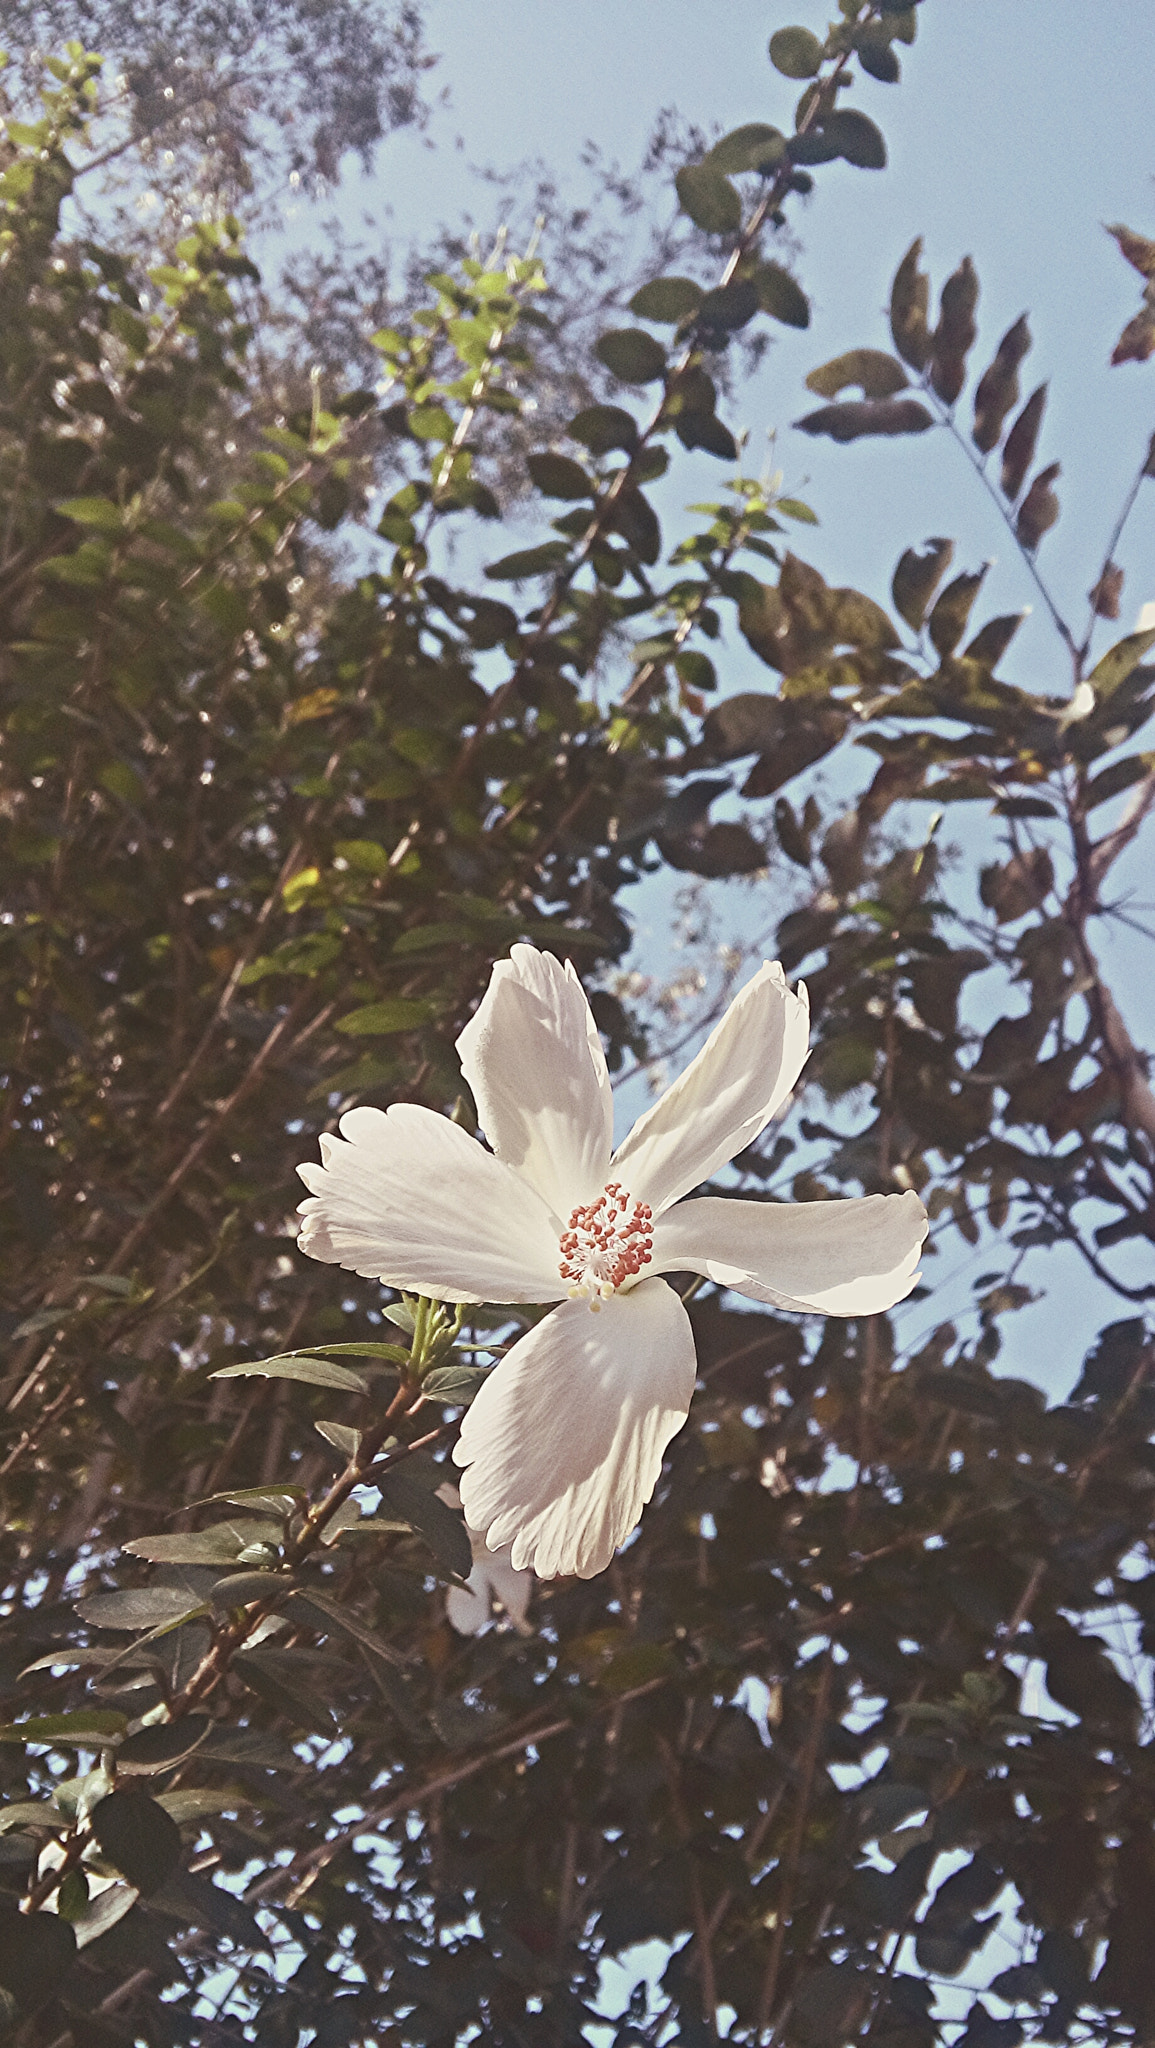 LG L Bello sample photo. The white flower. photography